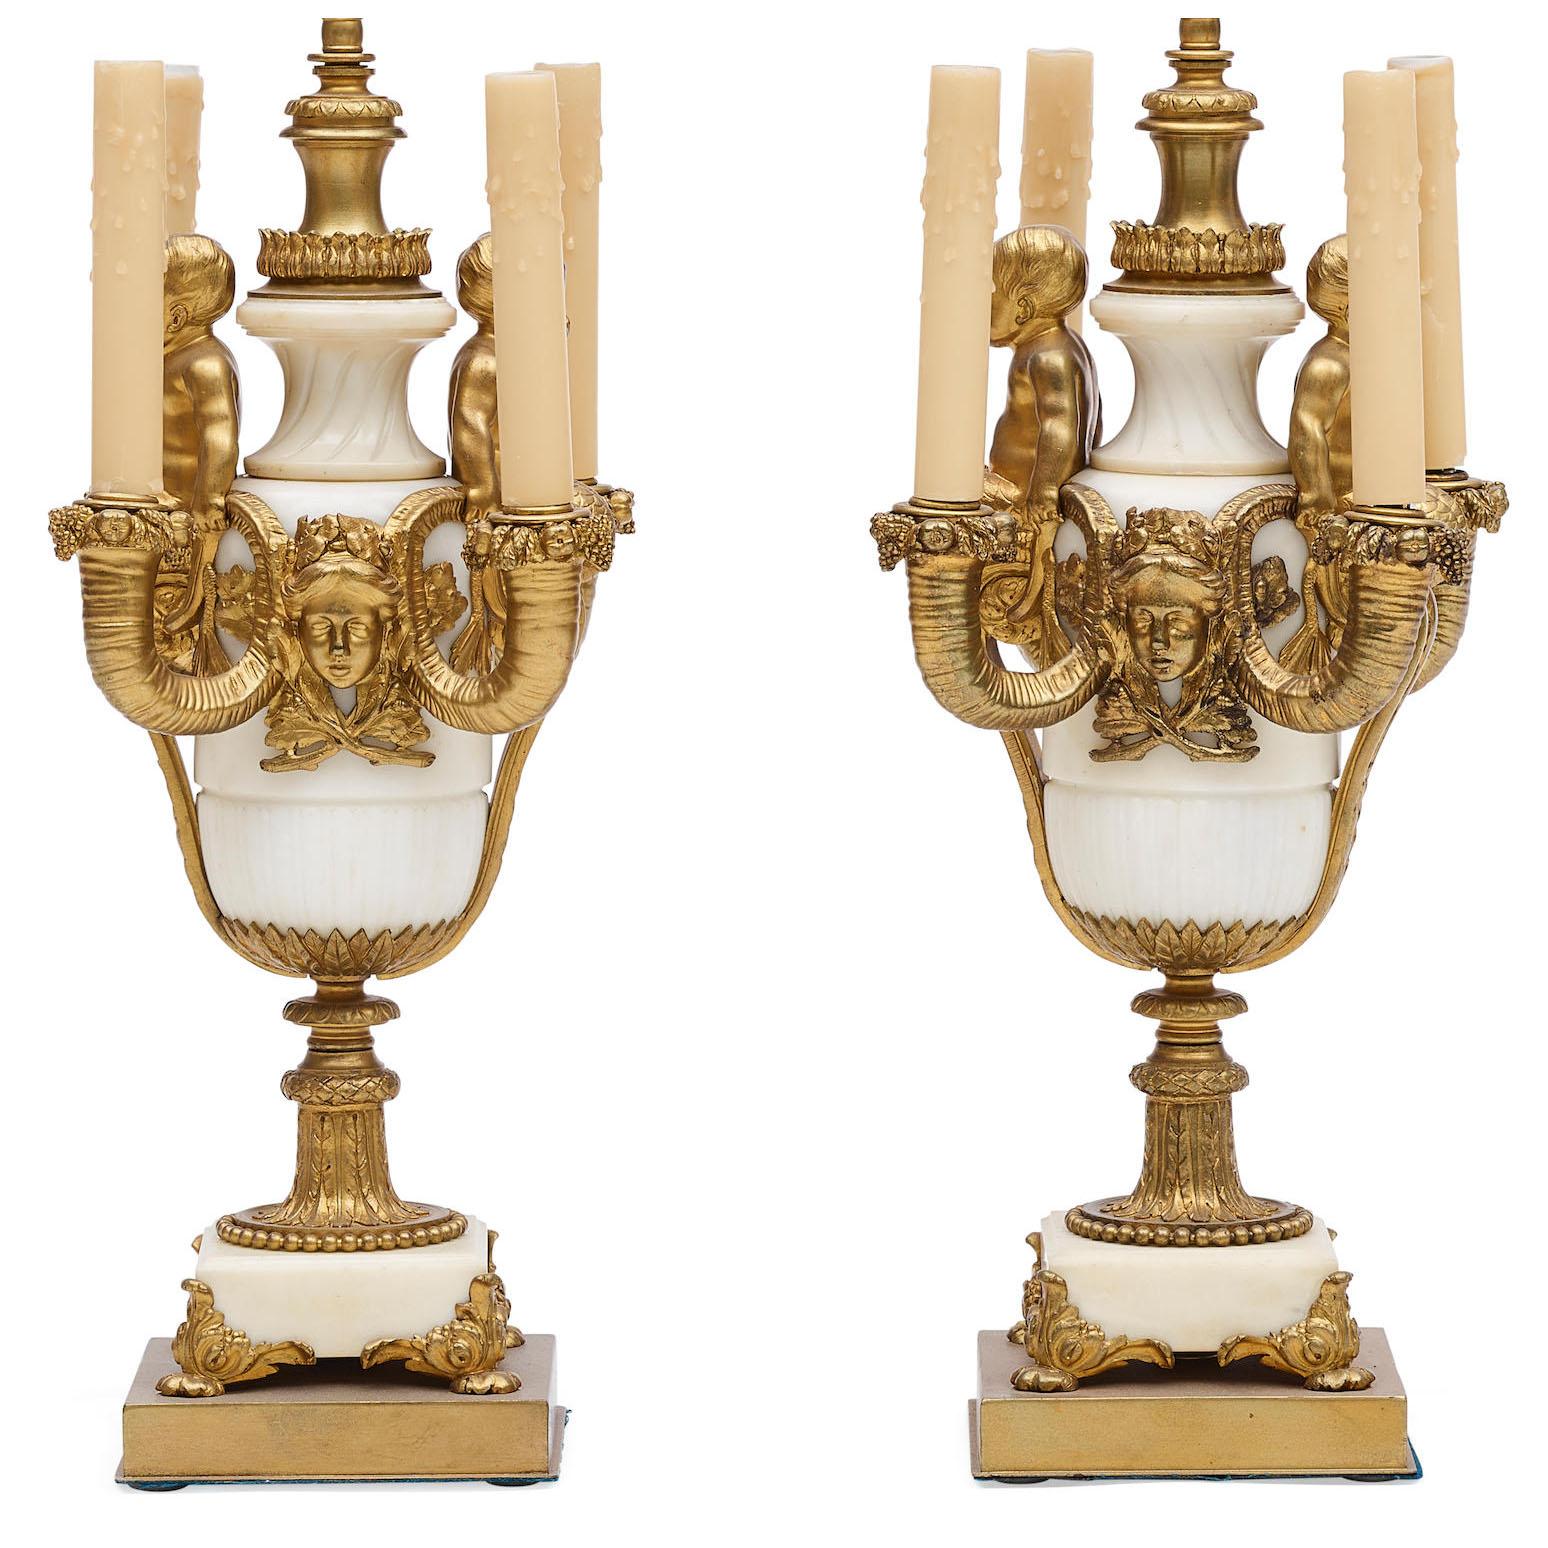 A Very Fine Pair of French 19th Century Louis XV Style White Marble and Gilt-Bronze Mounted Four-Light figural Candelabra (Now mounted as lamps), attributed to Henri Picard (French, 1831-1864). The ovoid white marble bodies, each supporting a pair